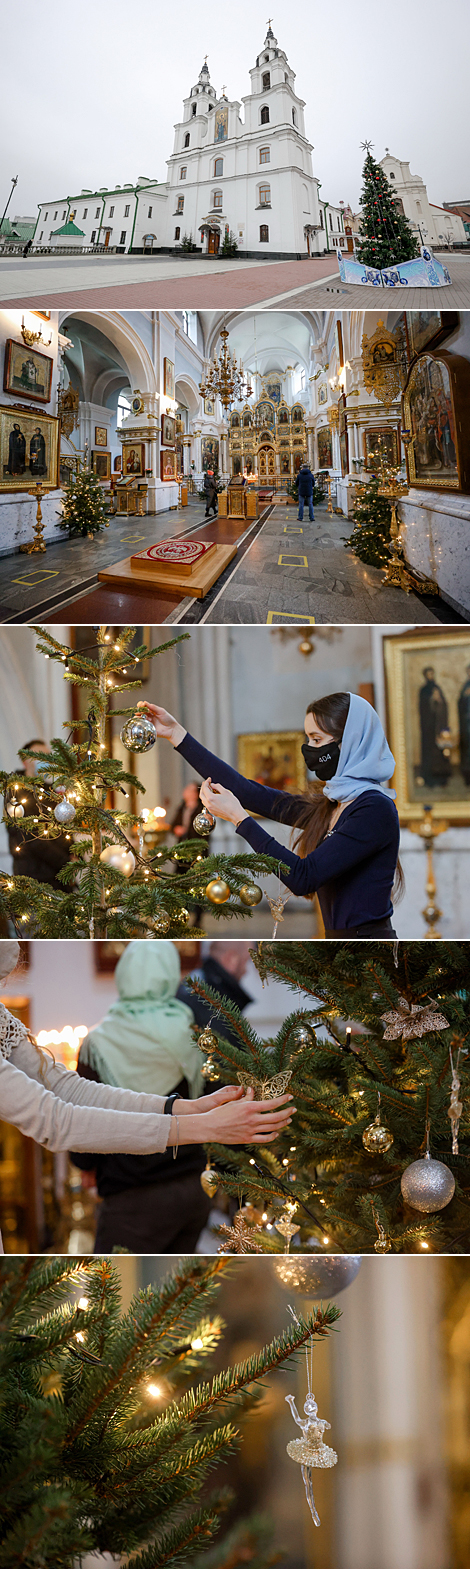 In anticipation of Christmas: Decorating a Christmas tree in the Holy Spirit Cathedral